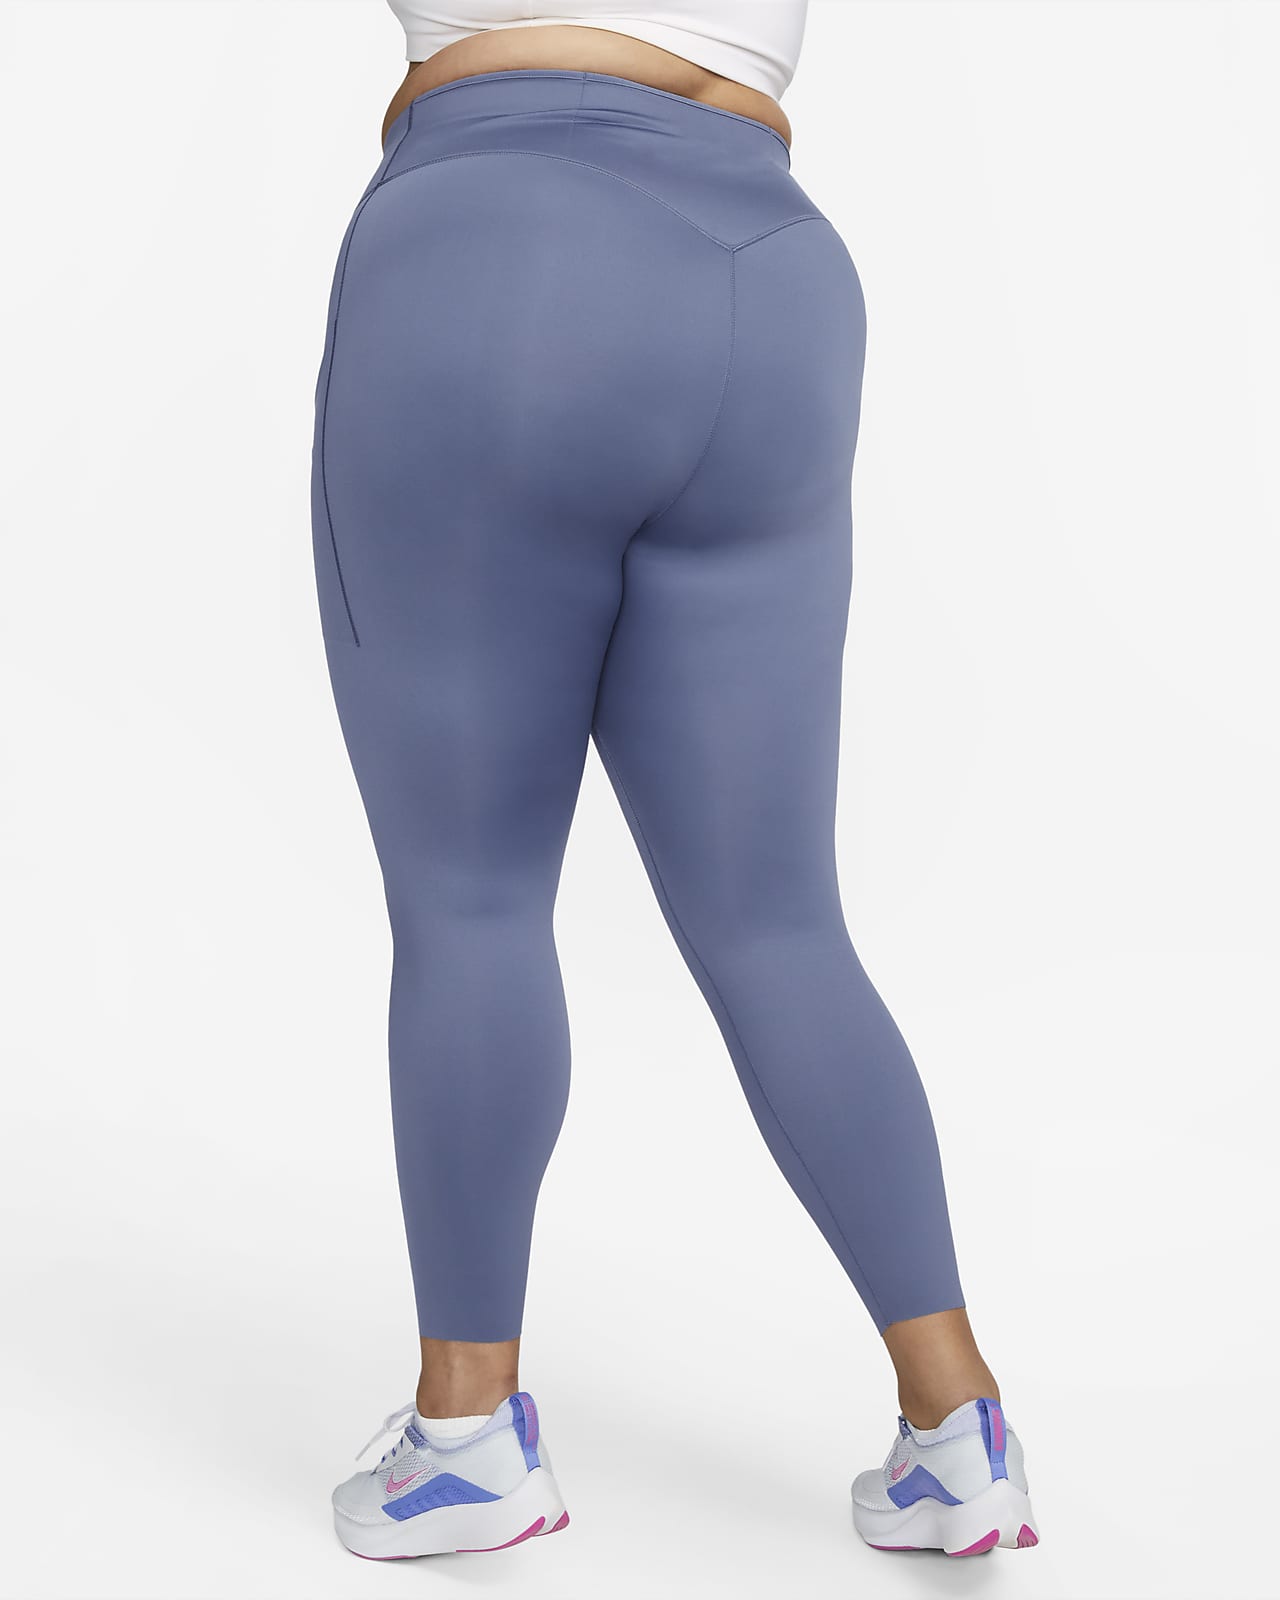 Nike Women's Go Firm-Support High-Waisted Full-Length Leggings with Pockets (Plus Size) in Blue, Size: 1x | DX3504-491